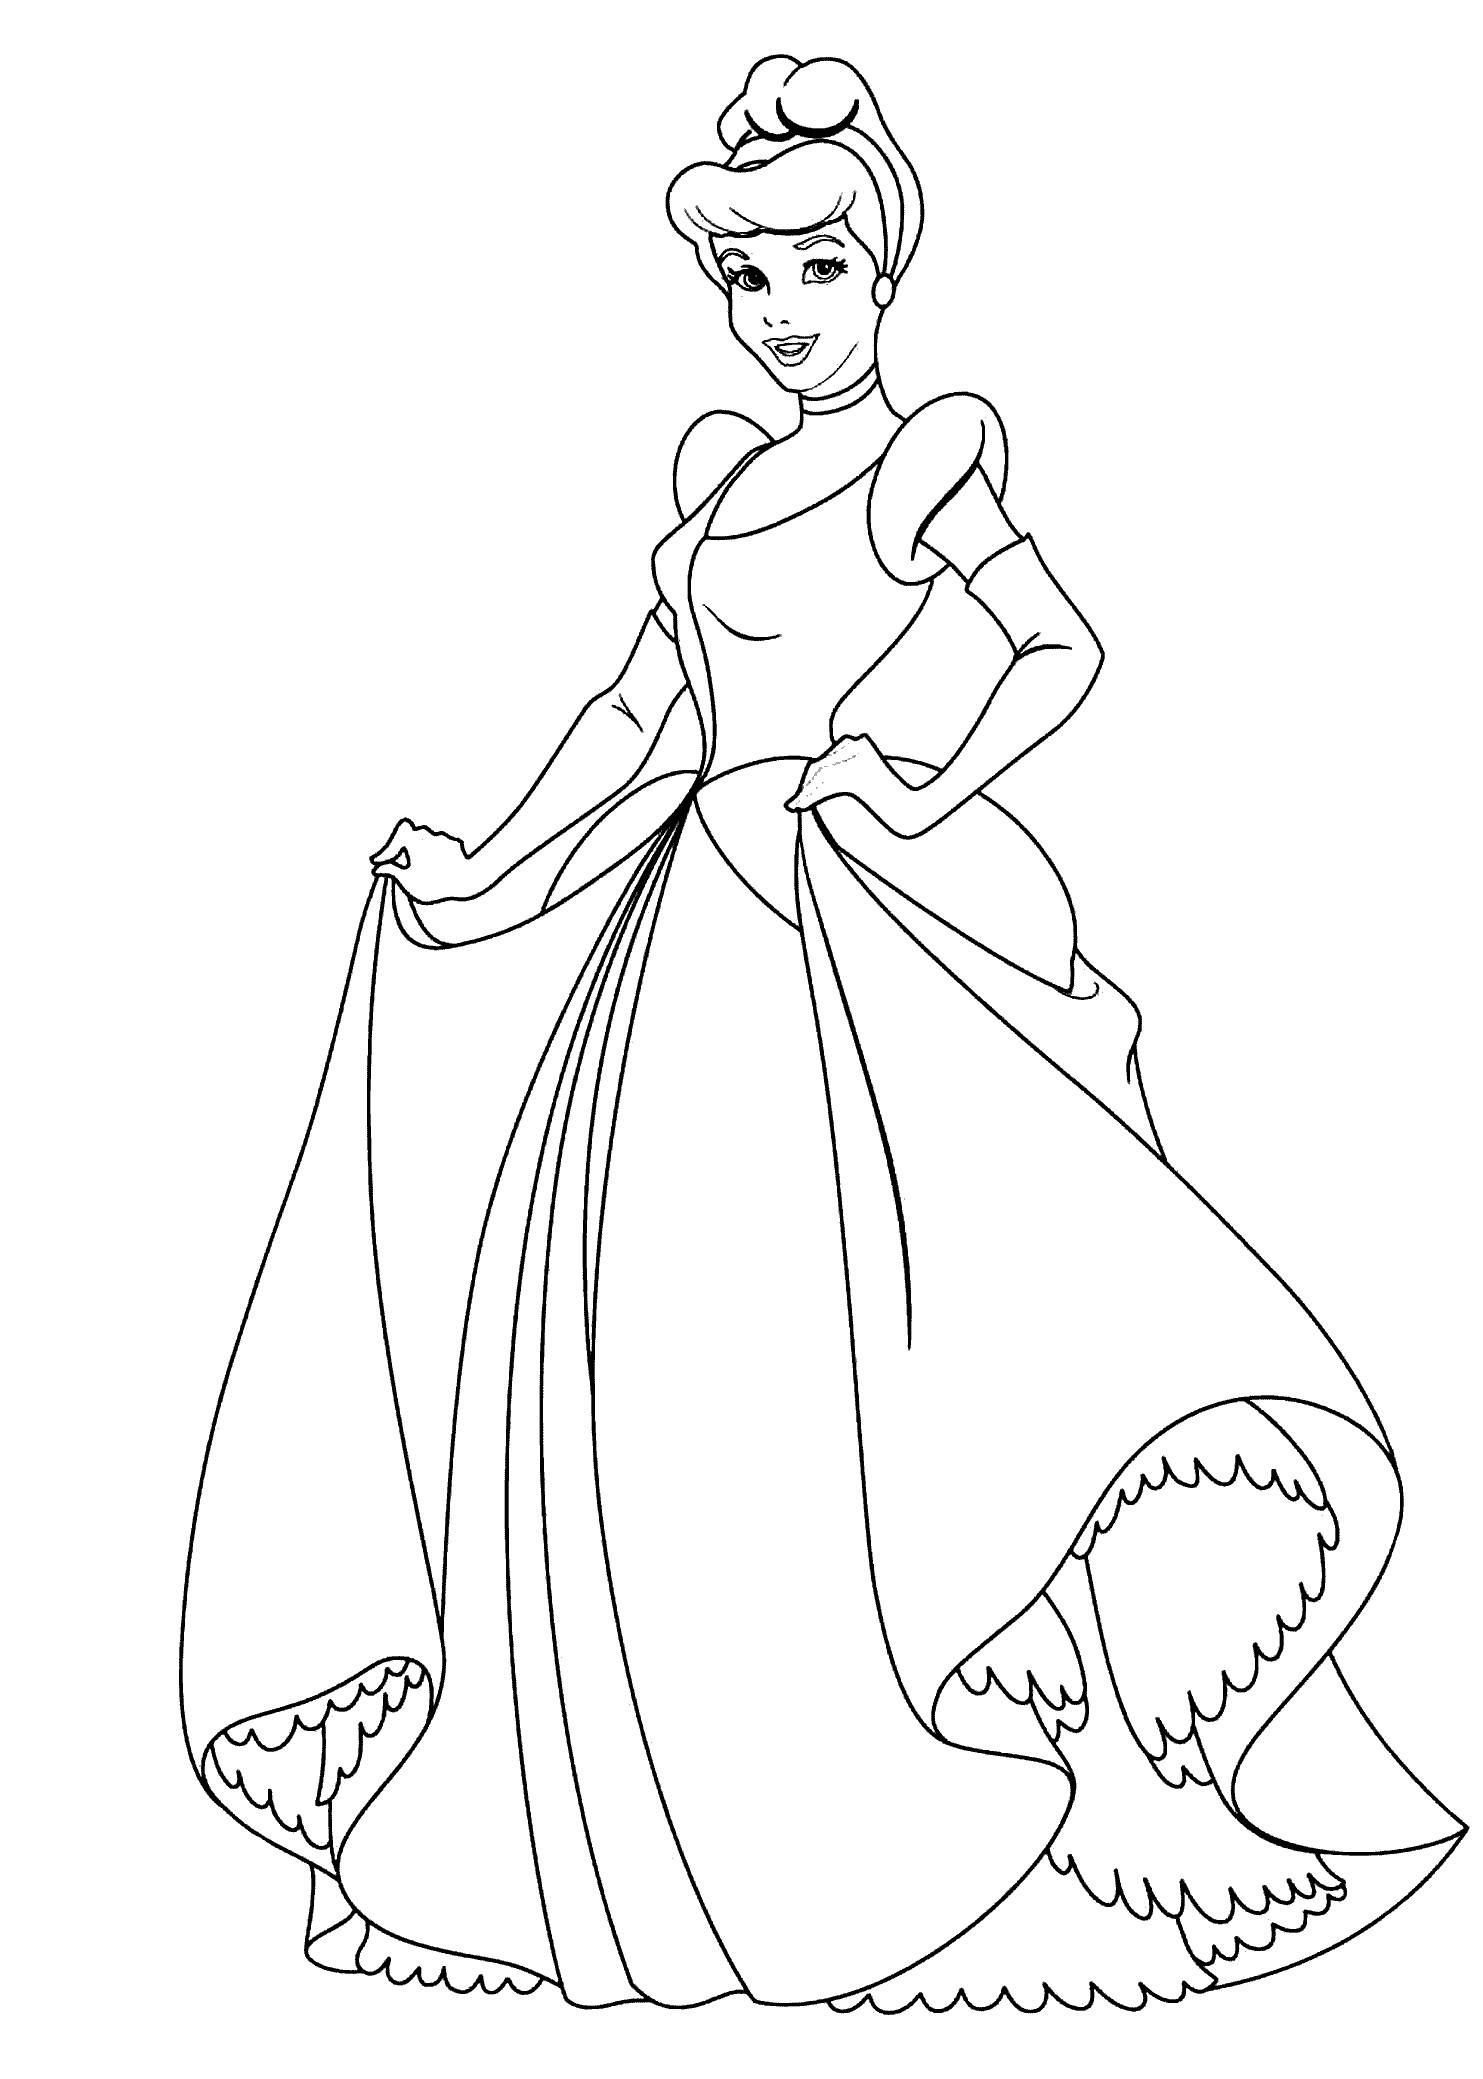 Princess Coloring Pages For Kids
 Cinderella princess coloring pages for kids printable